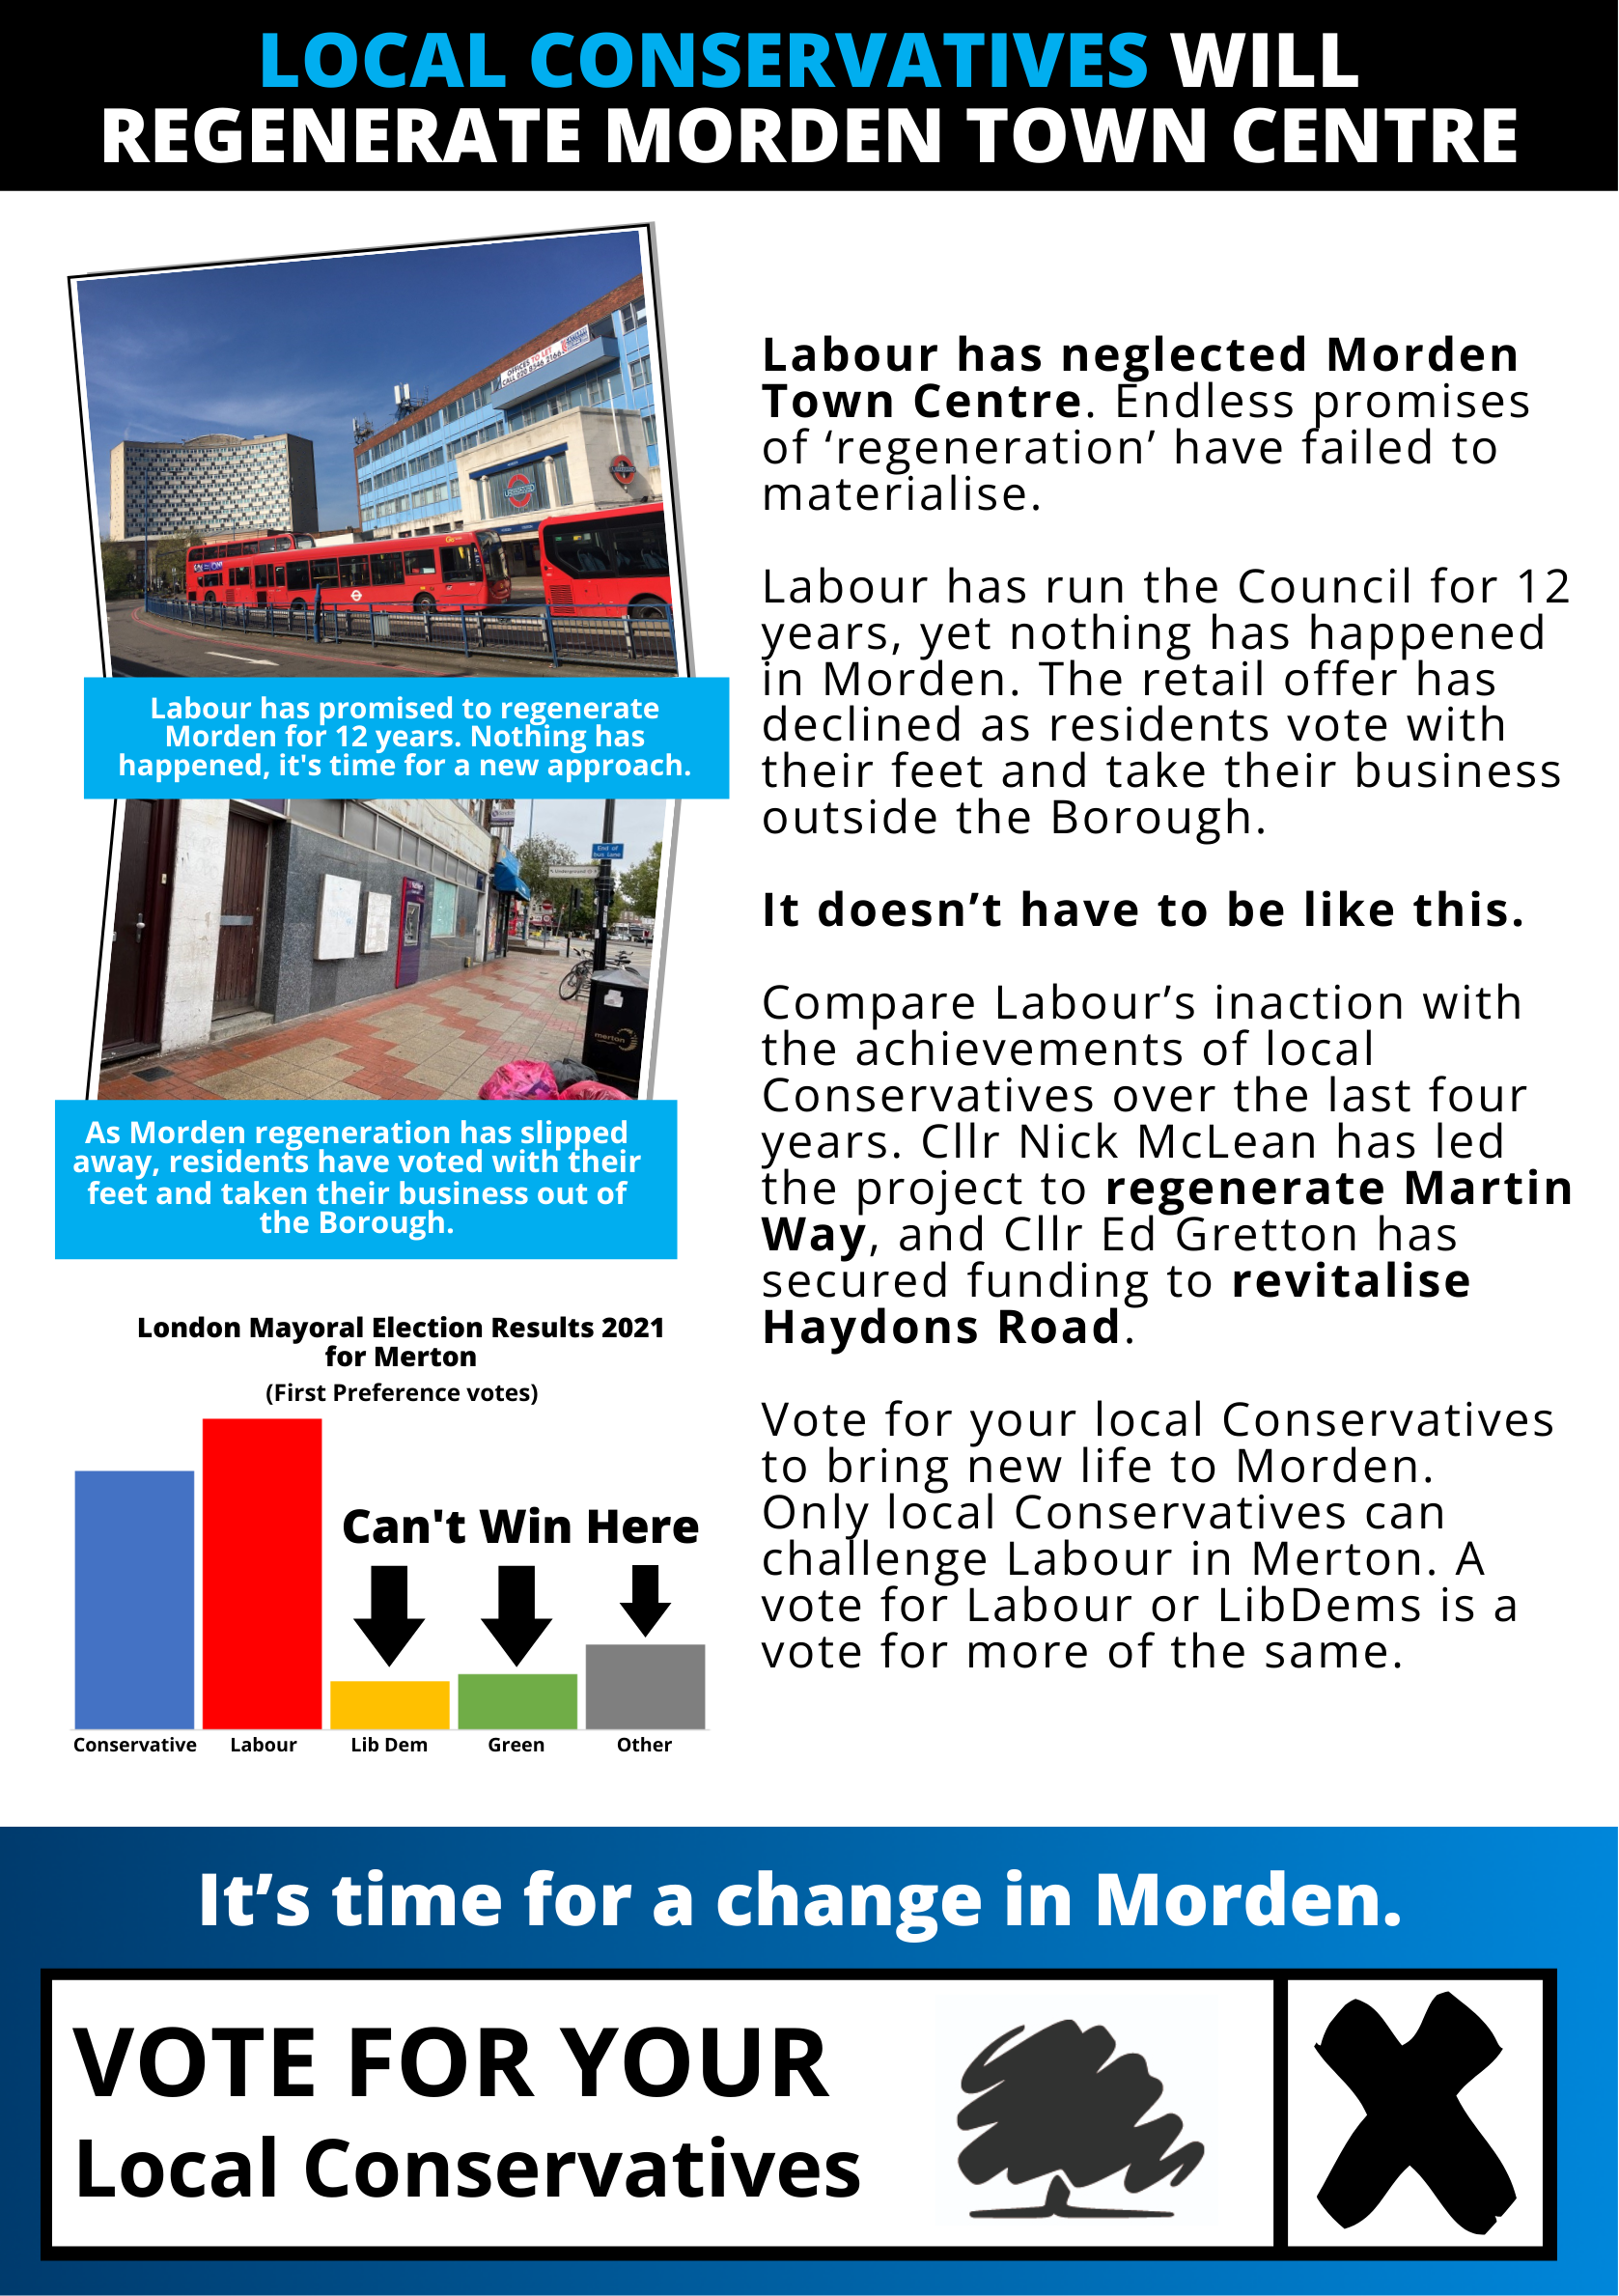 information on how local Conservatives will regenerate Morden town centre.